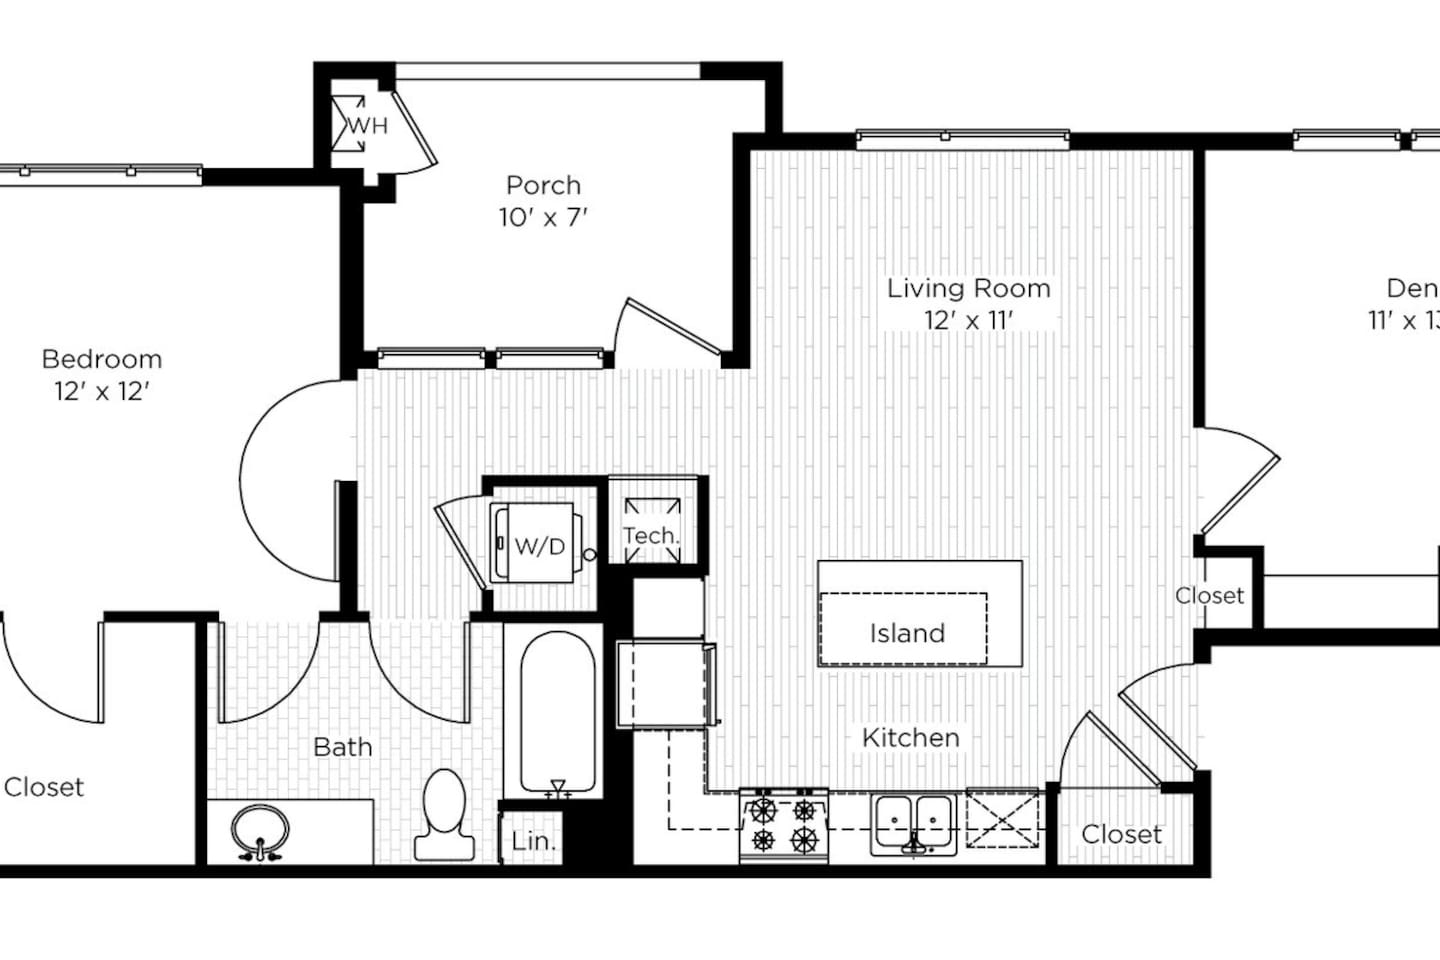 Floorplan diagram for The Aster North - 1EA, showing 1 bedroom